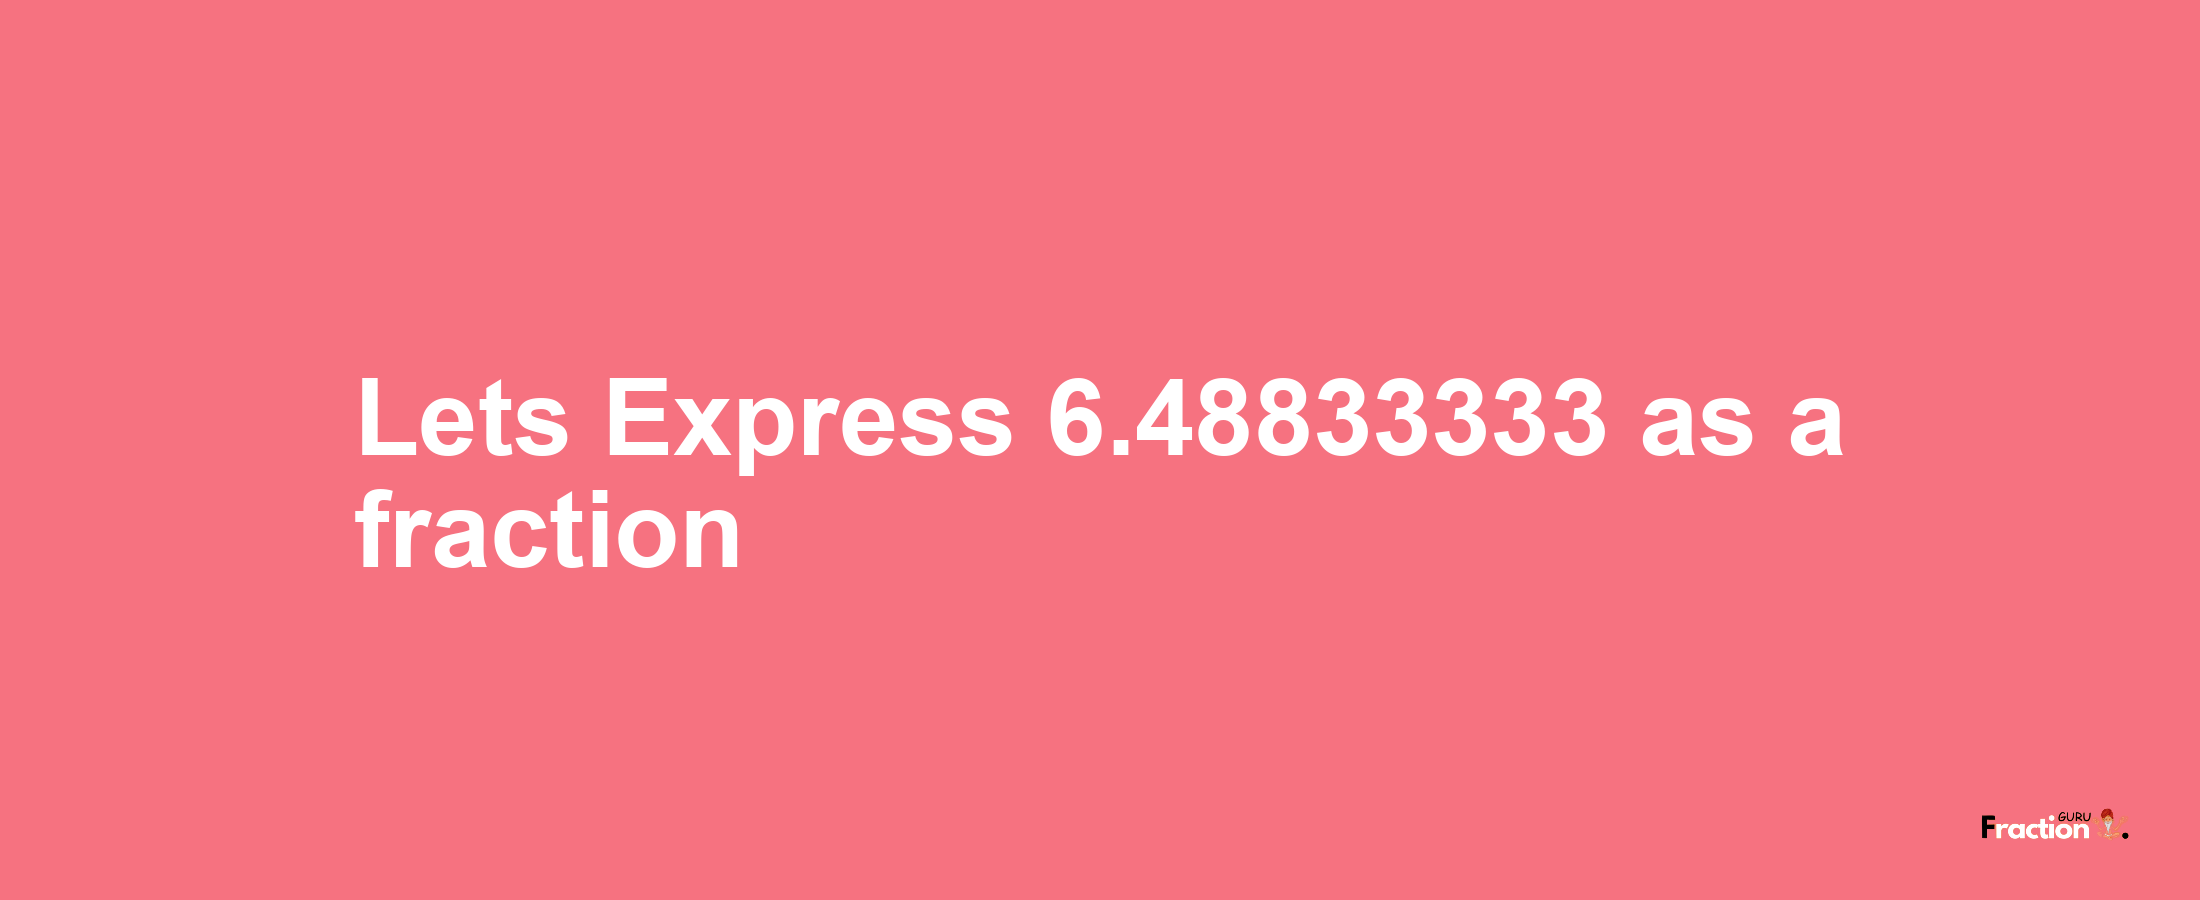 Lets Express 6.48833333 as afraction